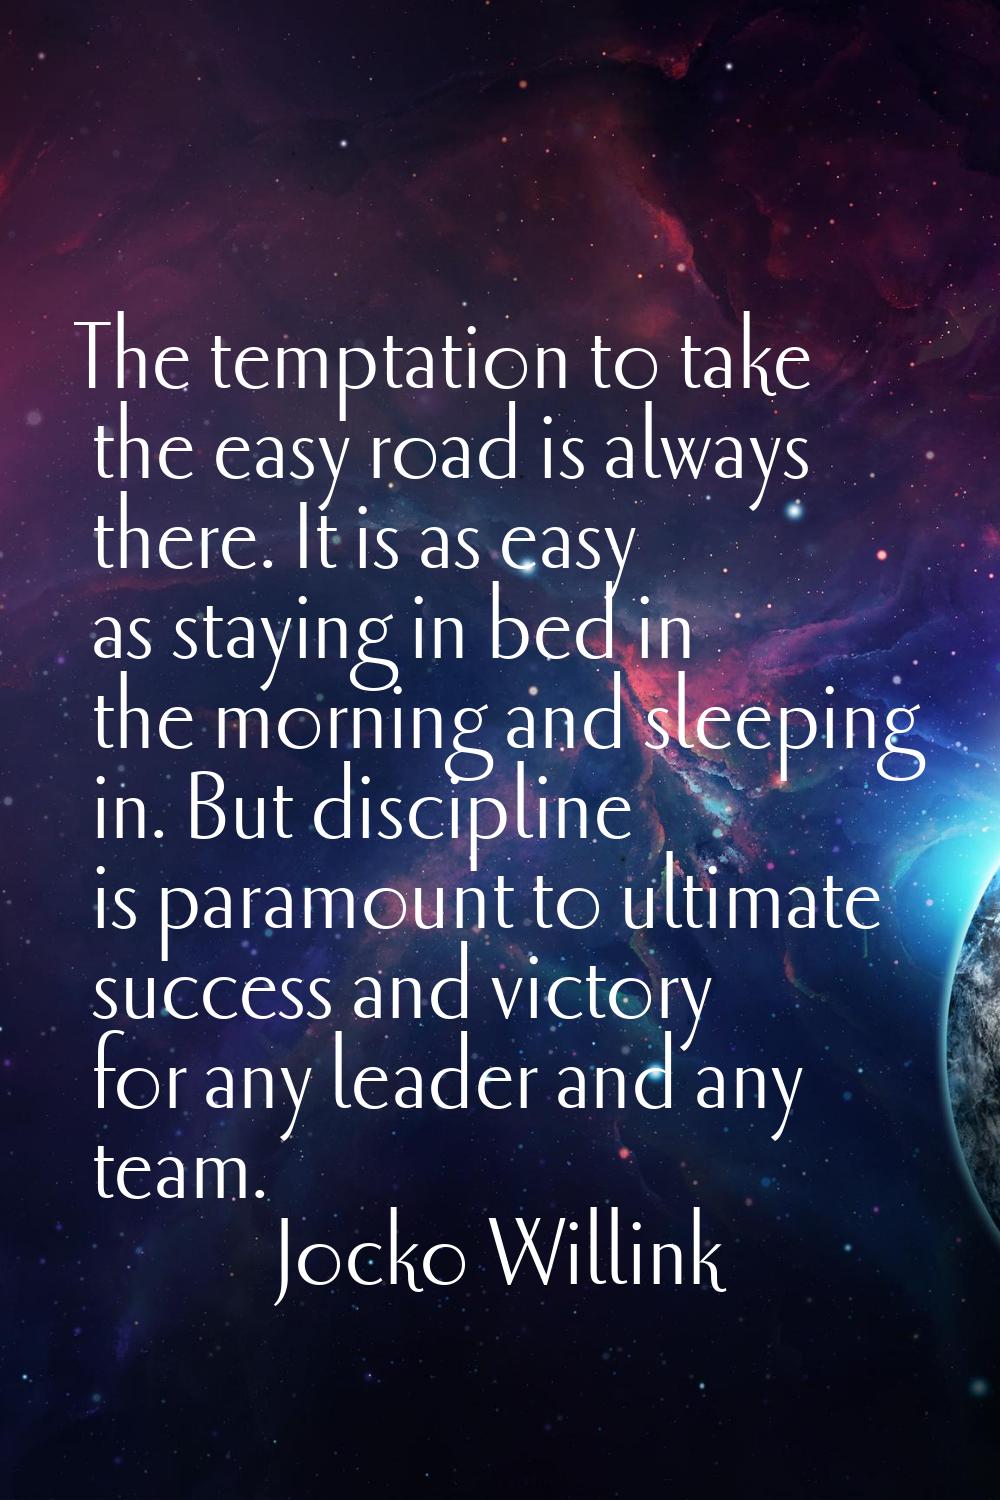 The temptation to take the easy road is always there. It is as easy as staying in bed in the mornin